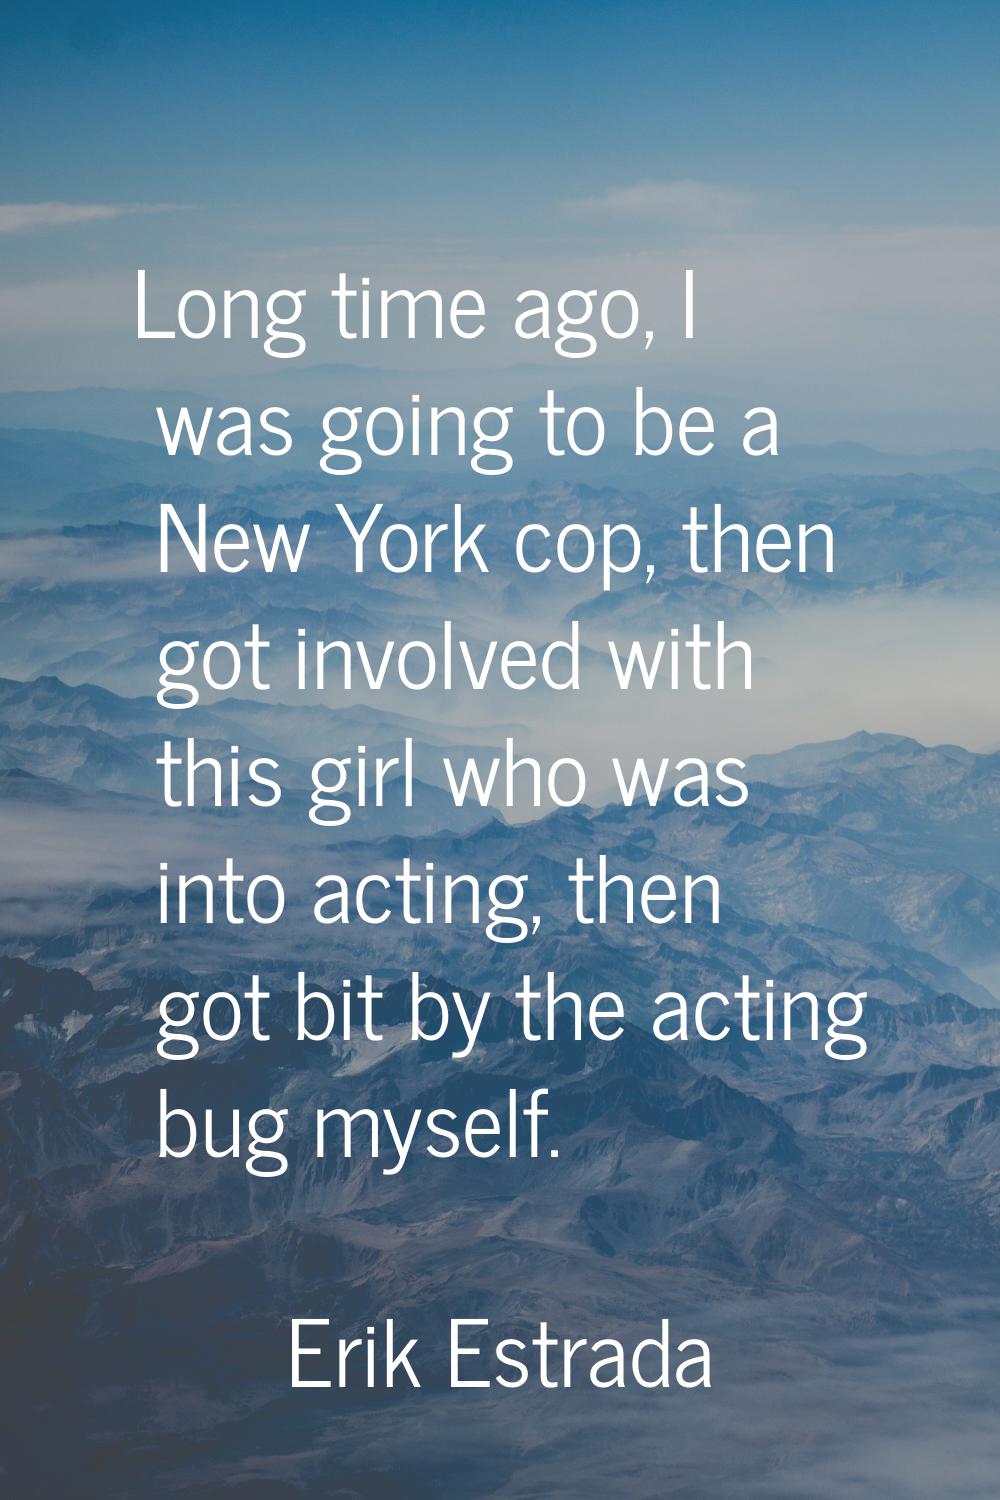 Long time ago, I was going to be a New York cop, then got involved with this girl who was into acti